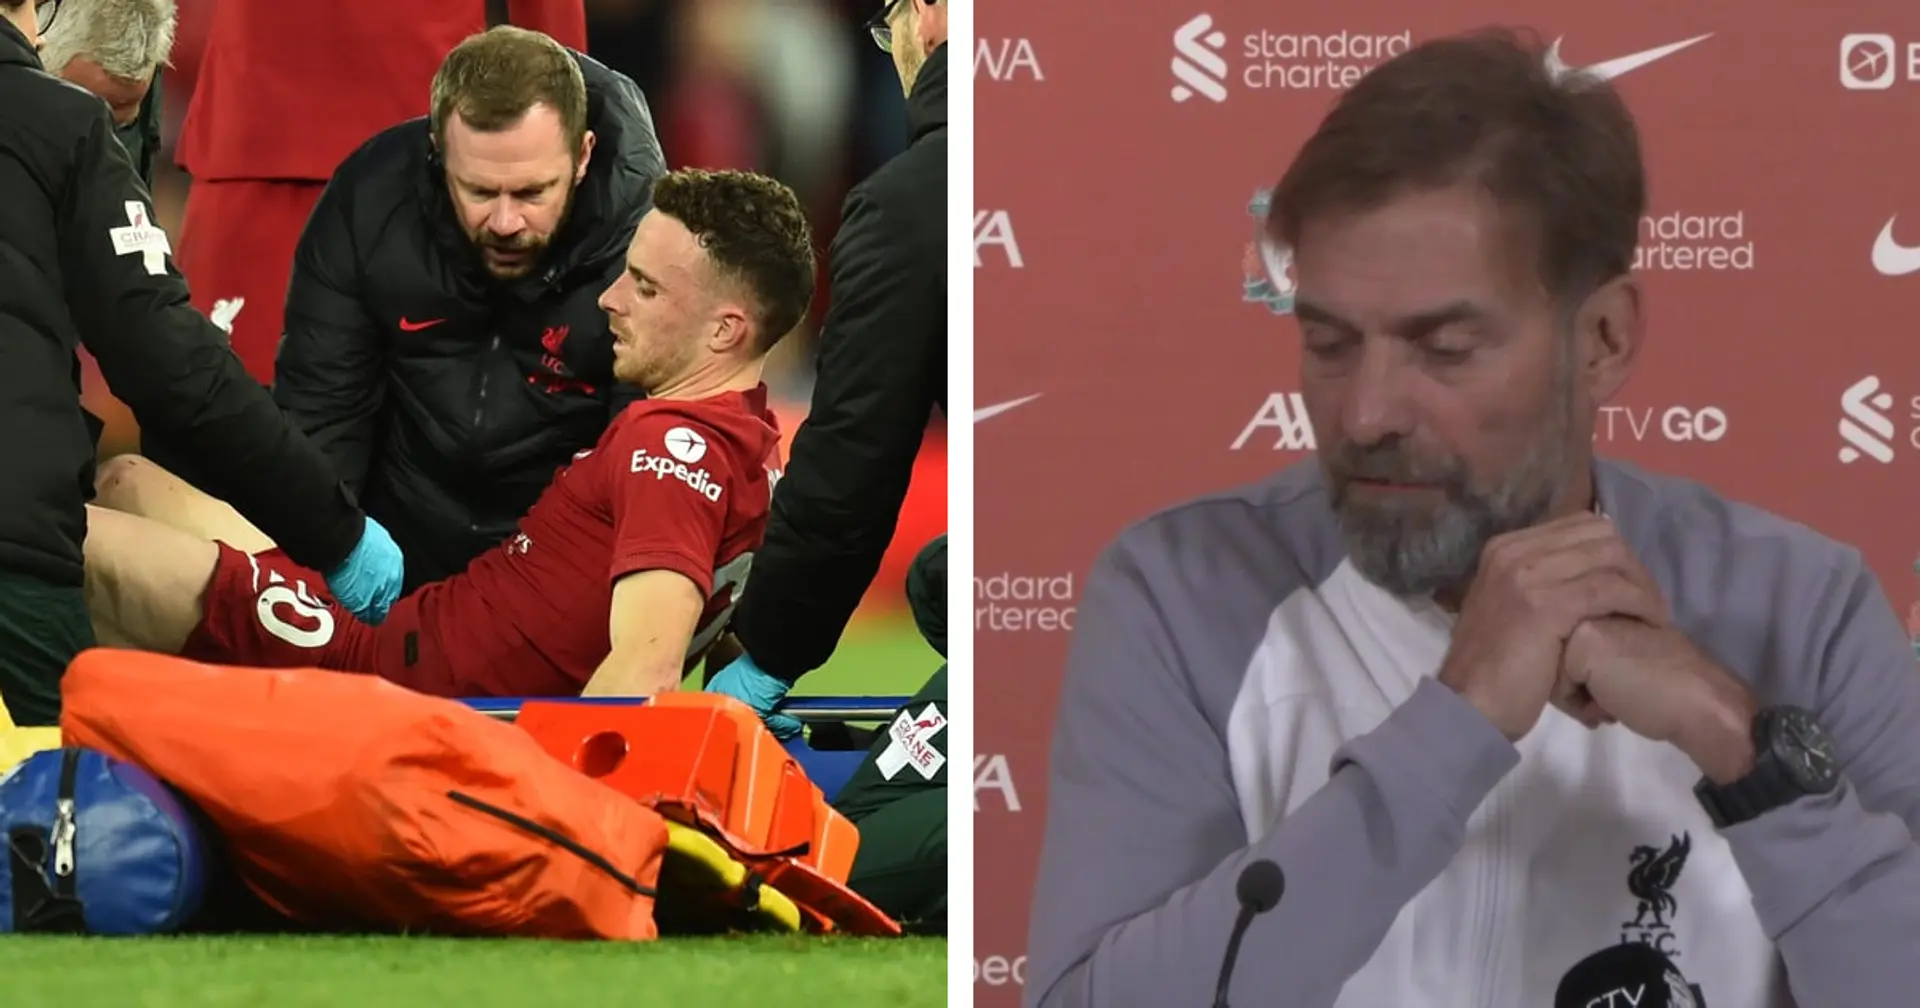 'We are all guilty': Klopp reacts as injuries mount ahead of World Cup